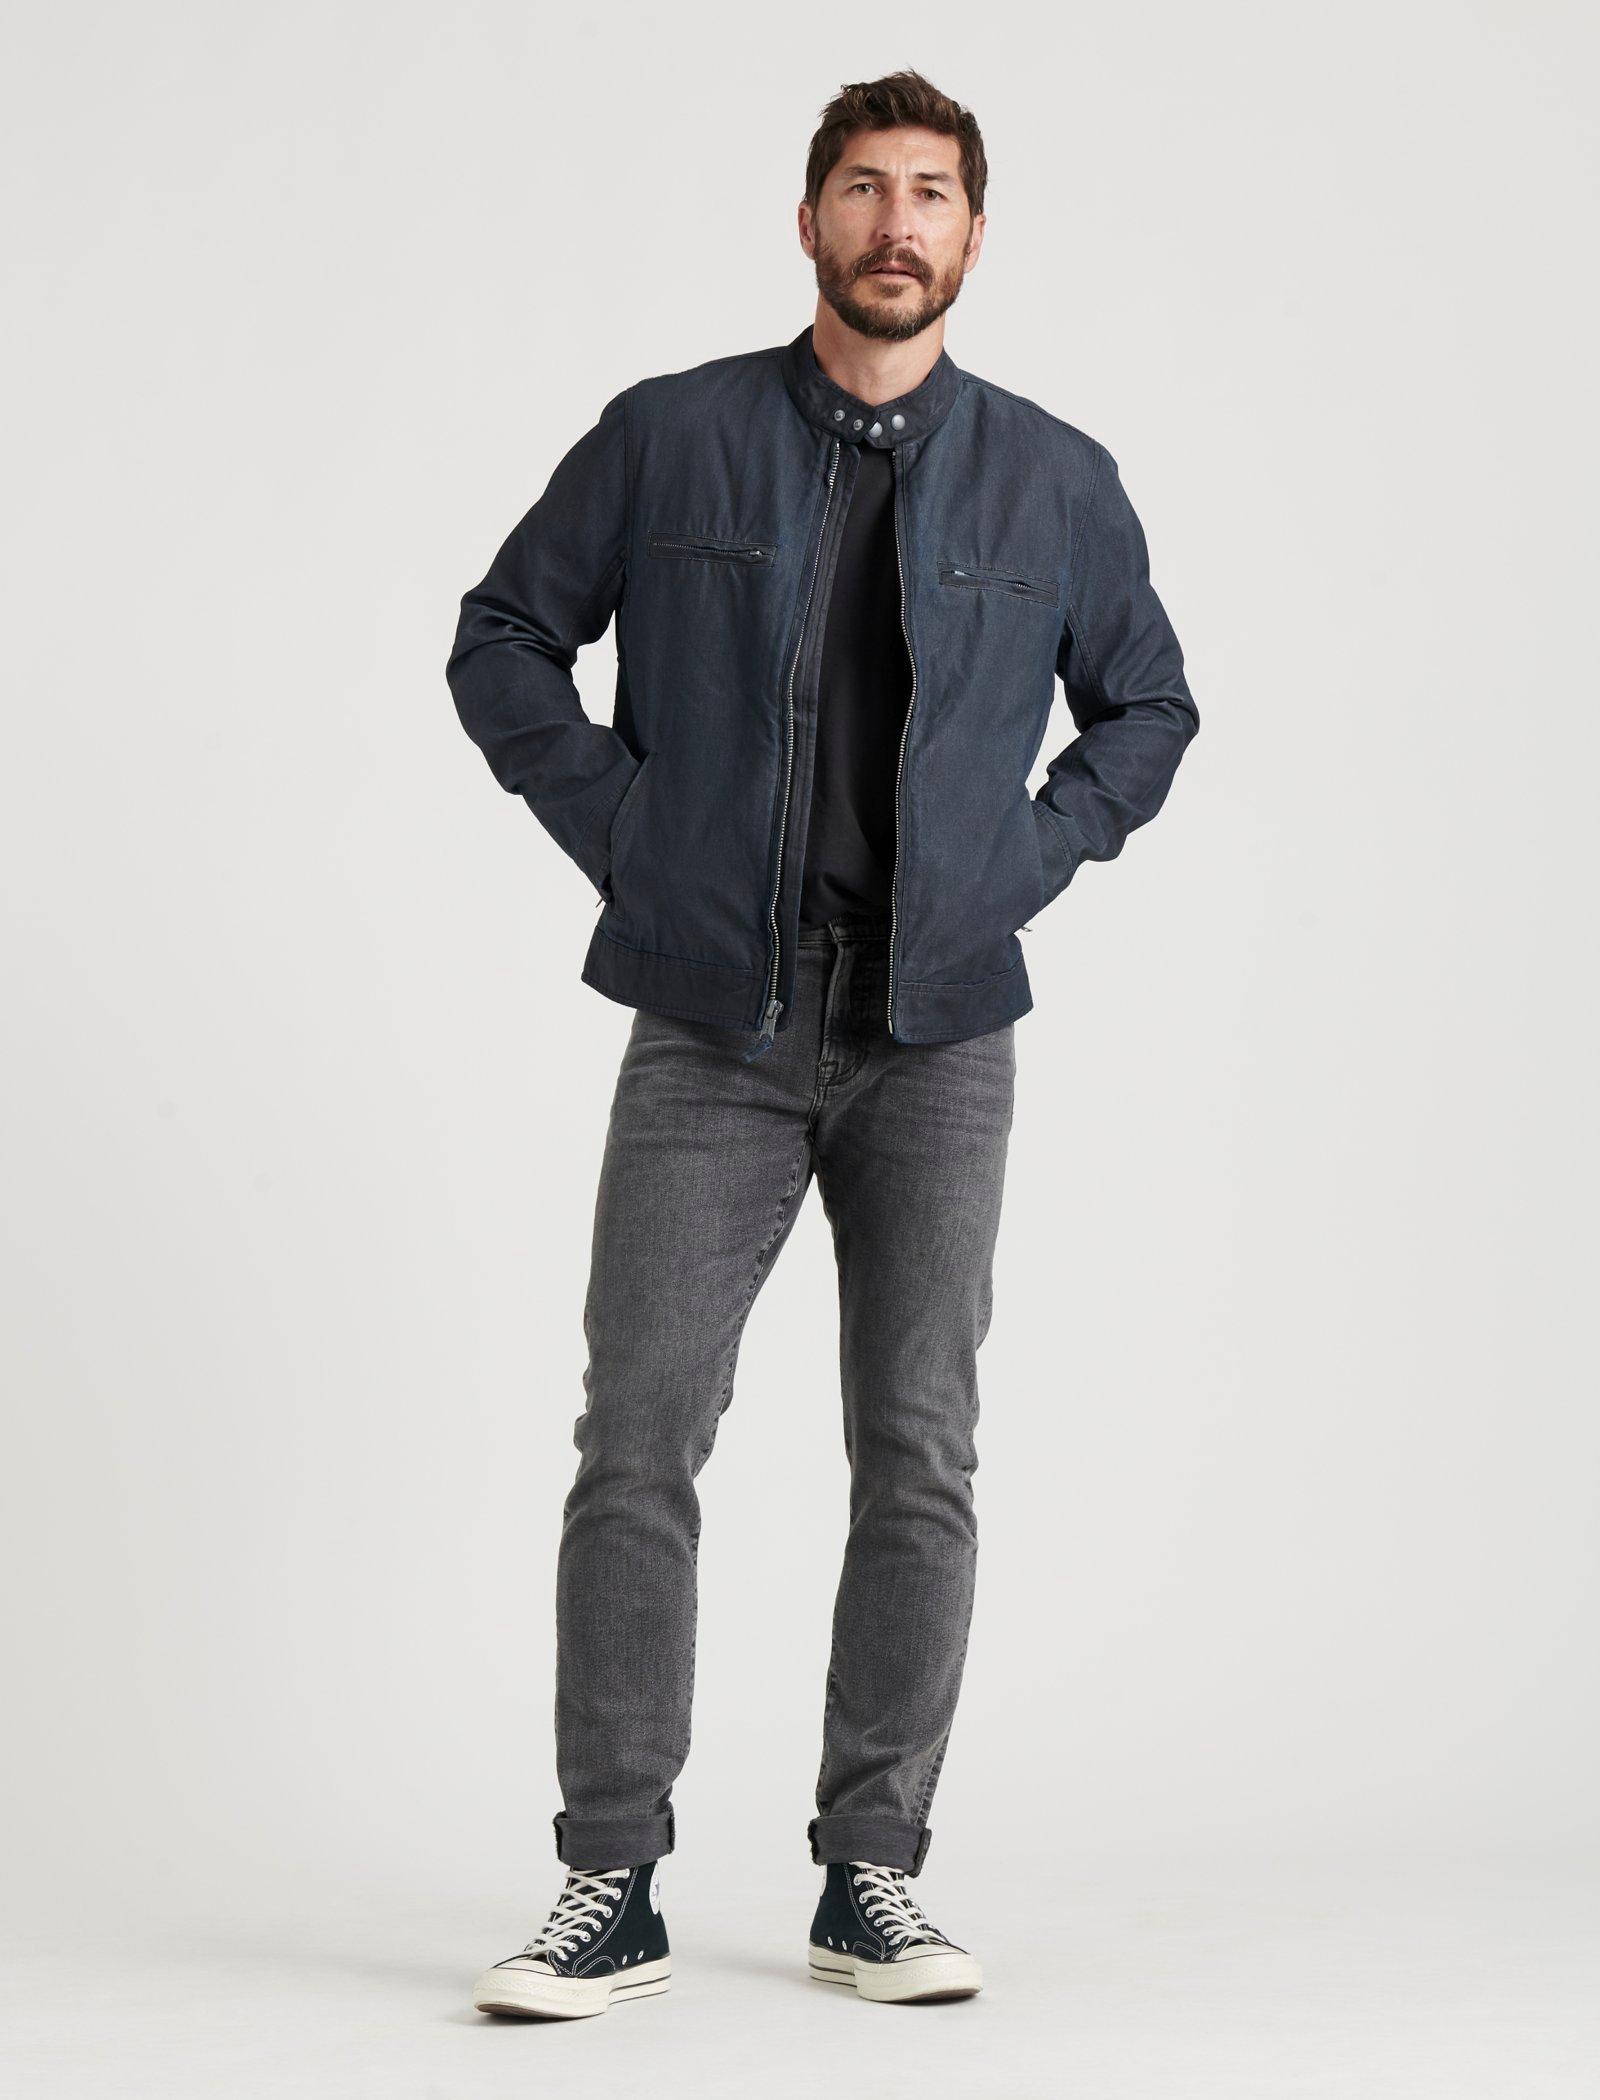 Jackets for Men | Buy One, Get One 50% Off Reg. Apparel | Lucky Brand